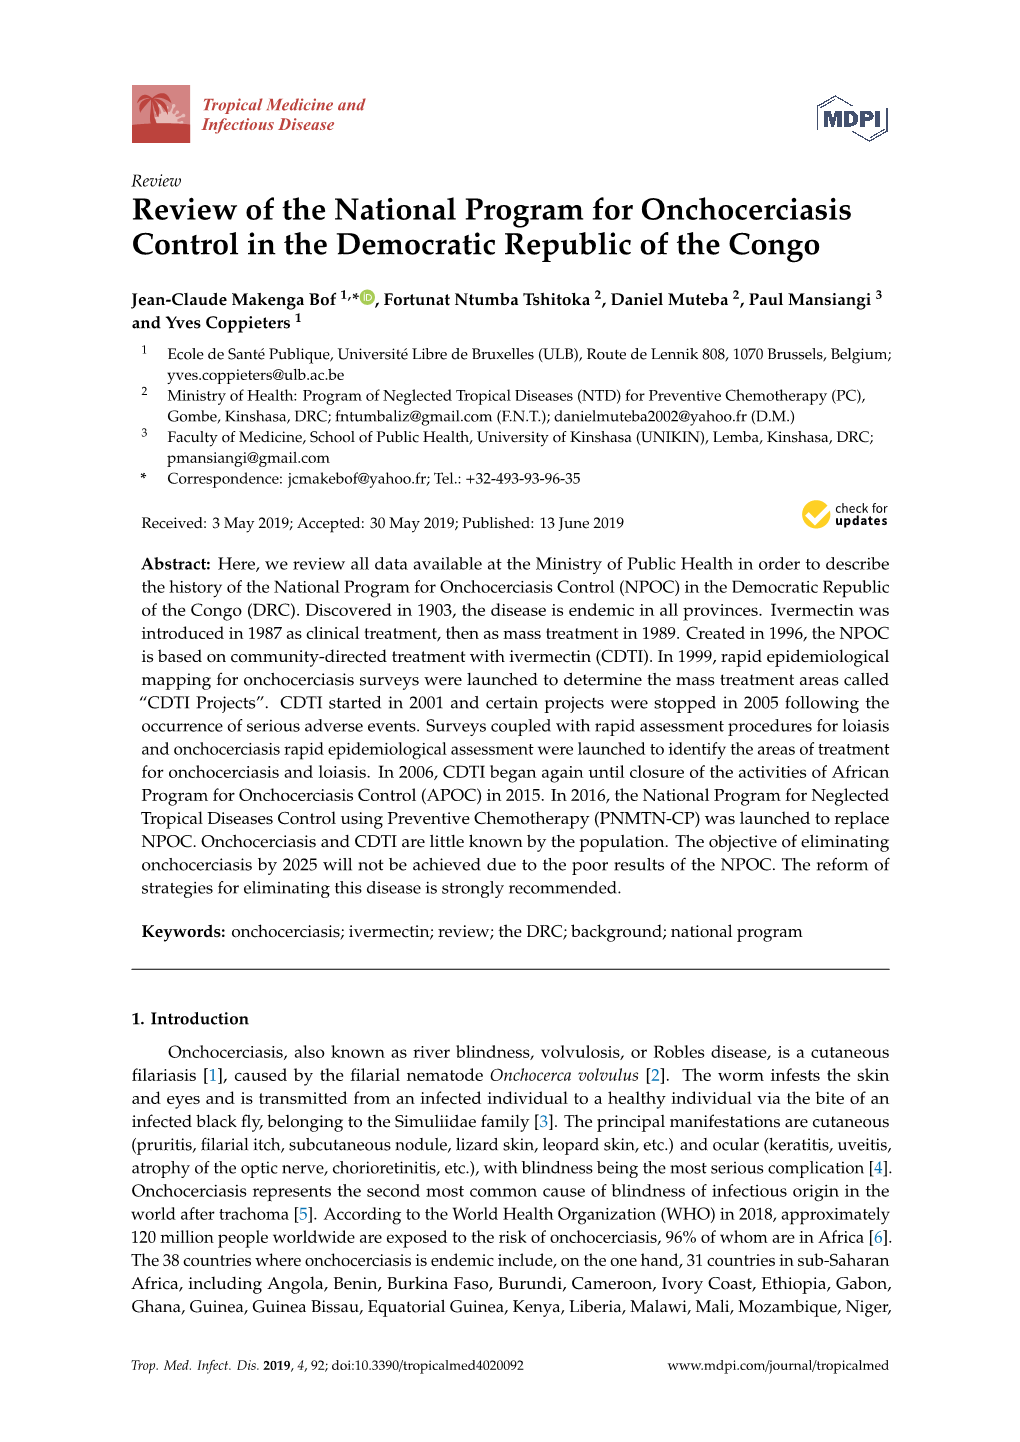 Review of the National Program for Onchocerciasis Control in the Democratic Republic of the Congo